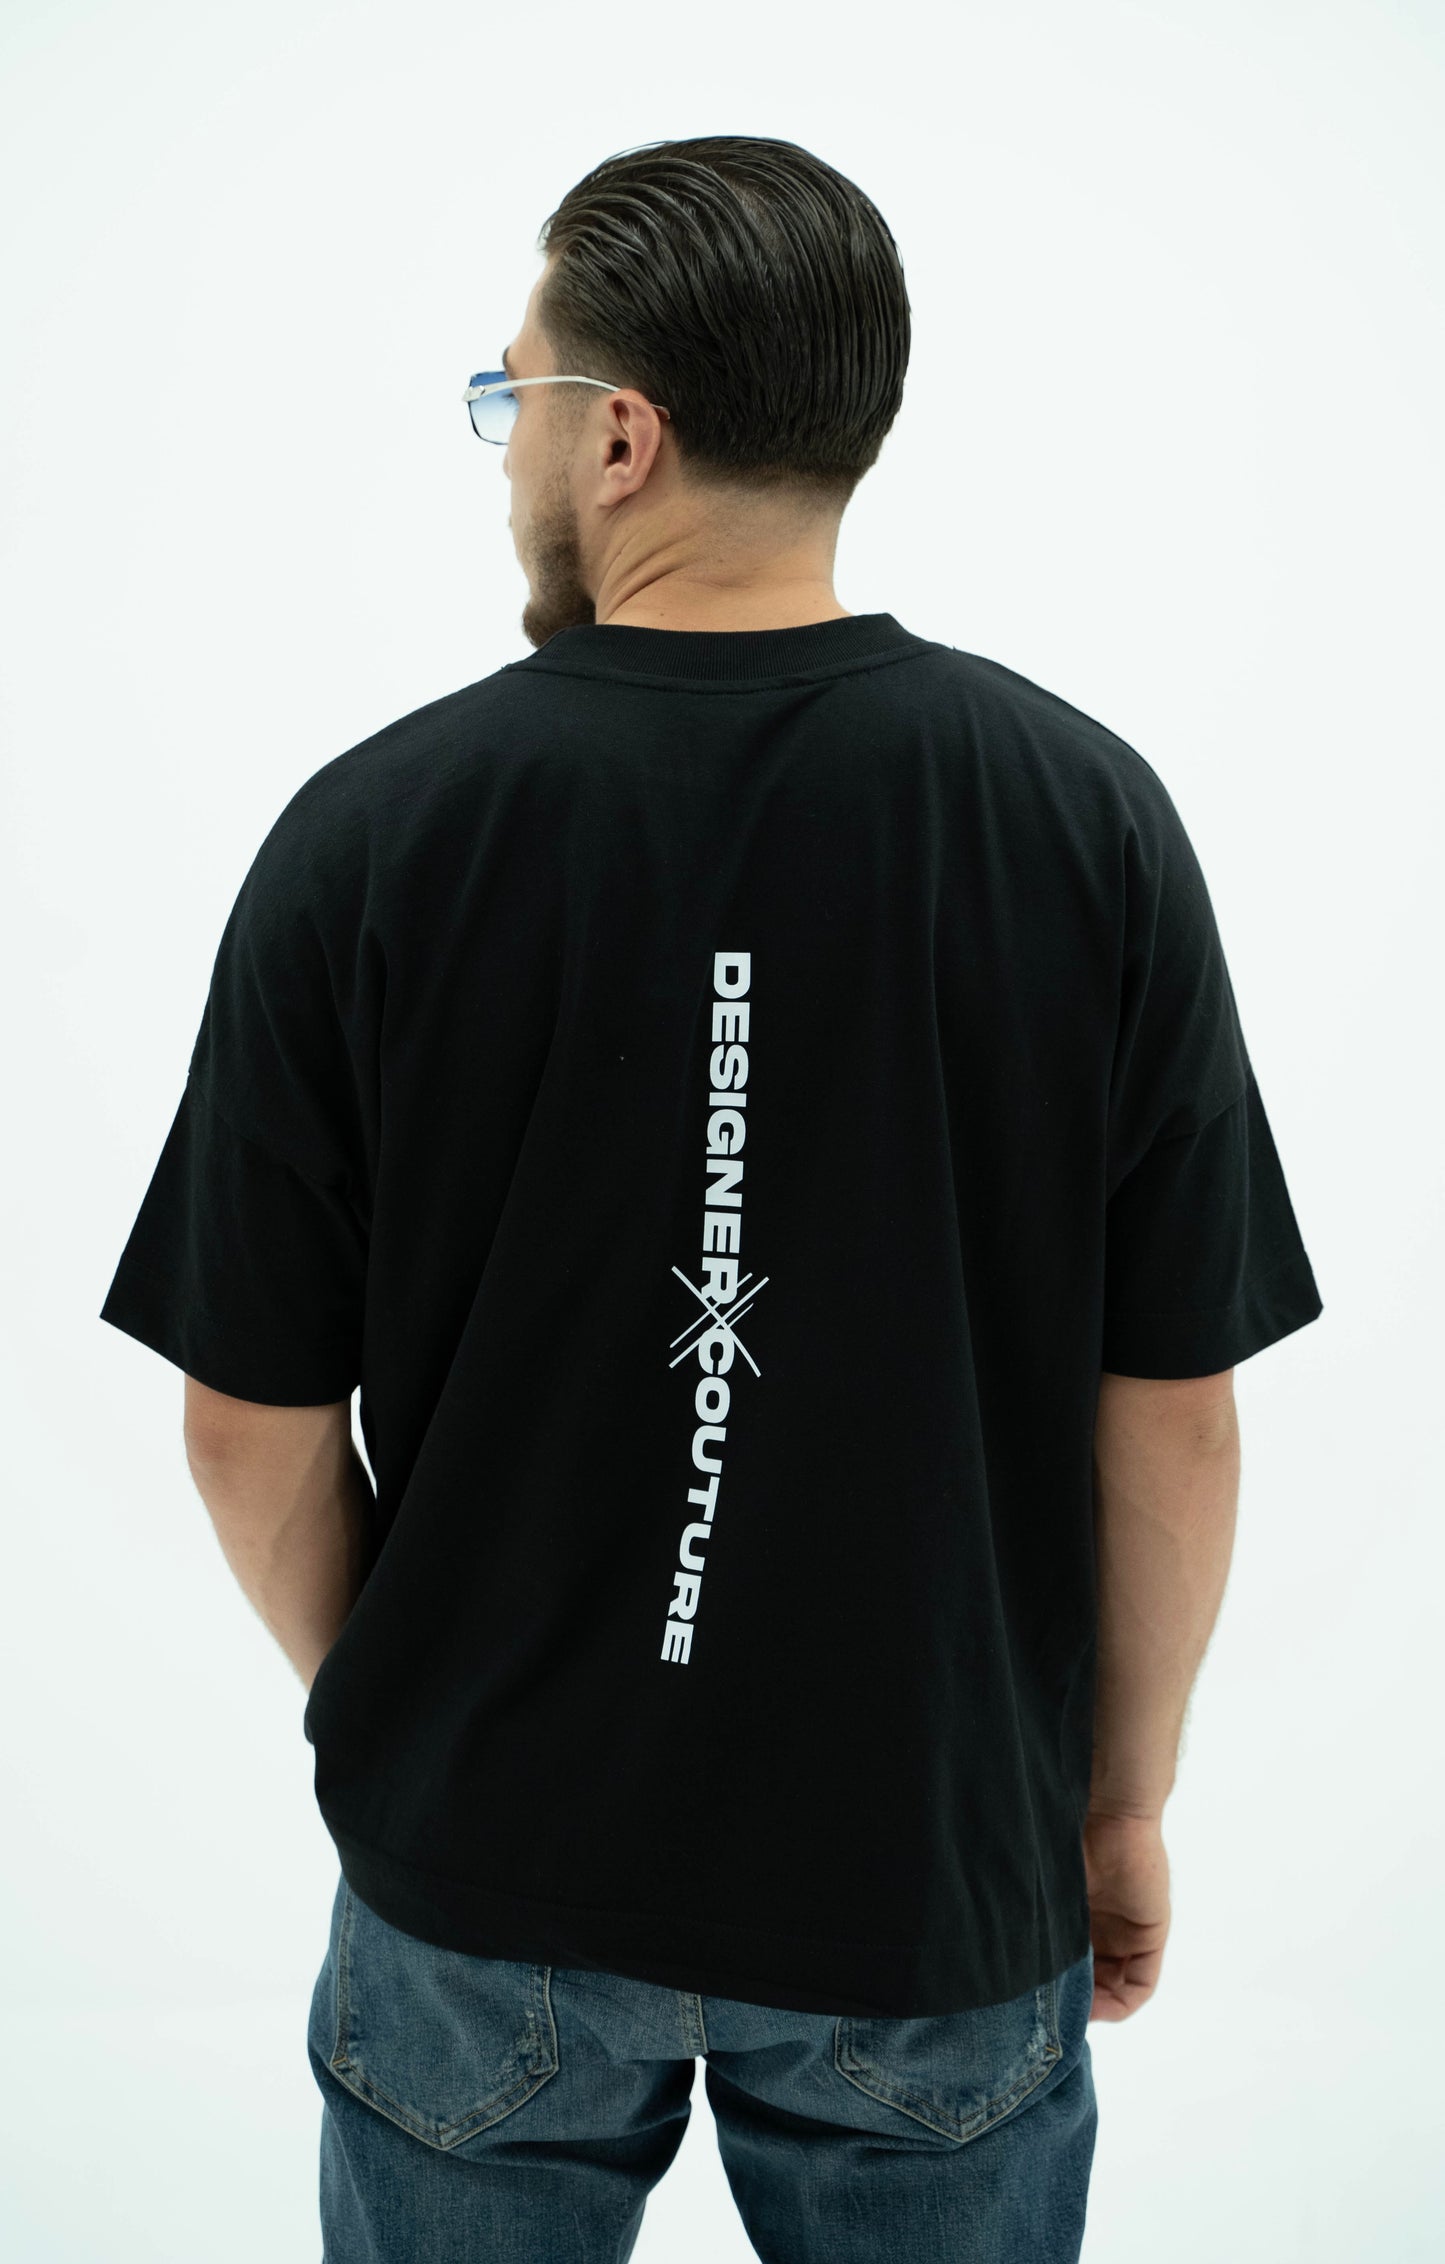 Oversized Black t-shirt with long DC details in the back